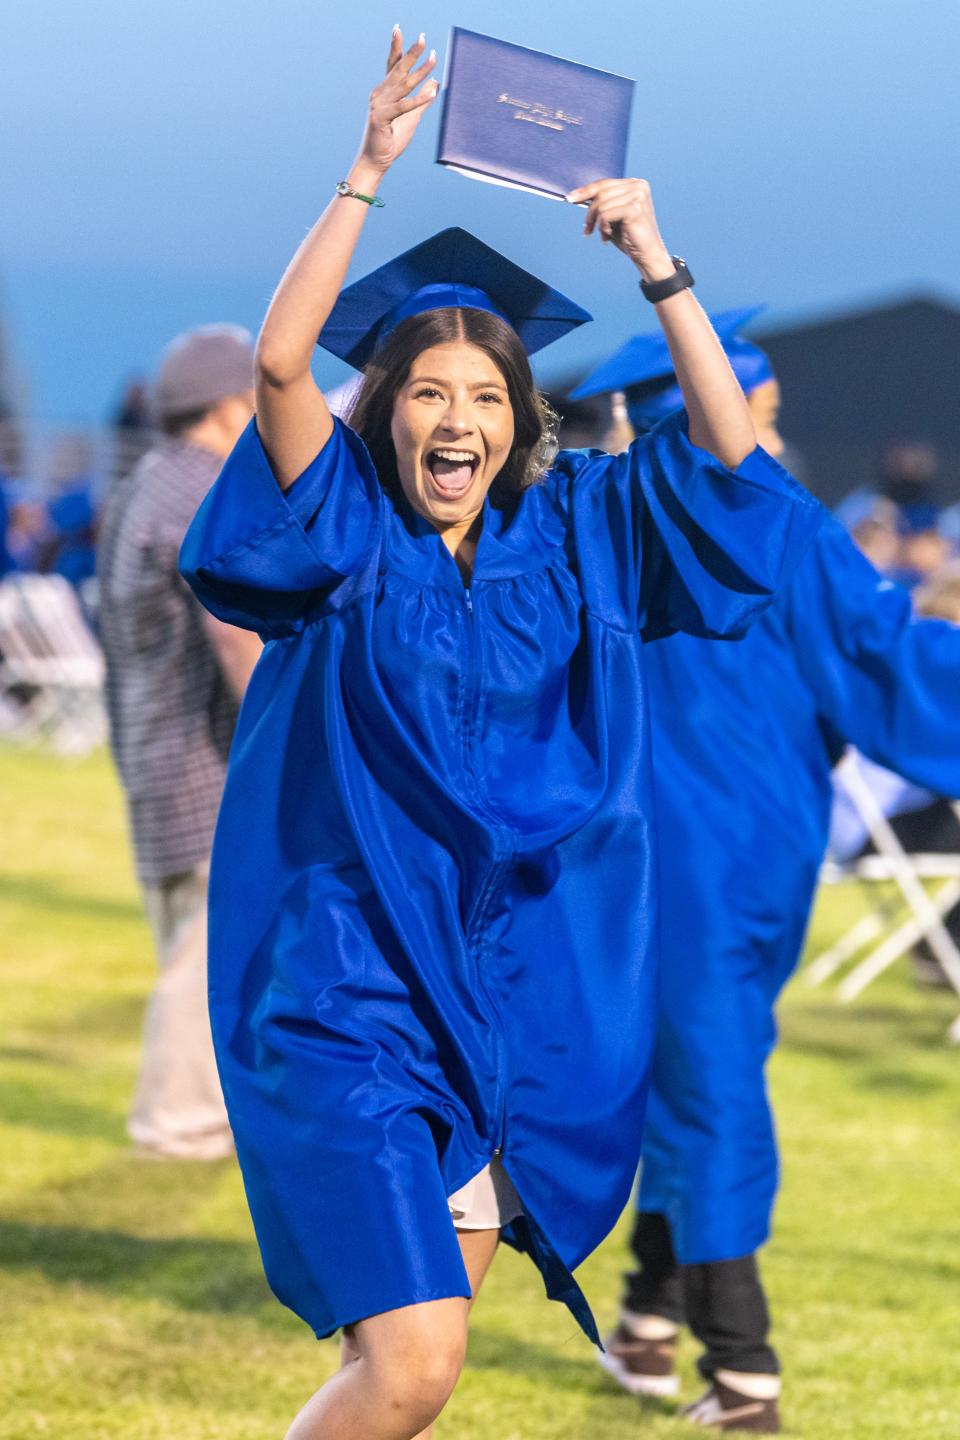 Graduates celebrate after receiving their Serrano High School diplomas during the school's Graduation Ceremony in Phelan CA on Thursday June 8, 2023. (James Quigg, for the Daily Press)